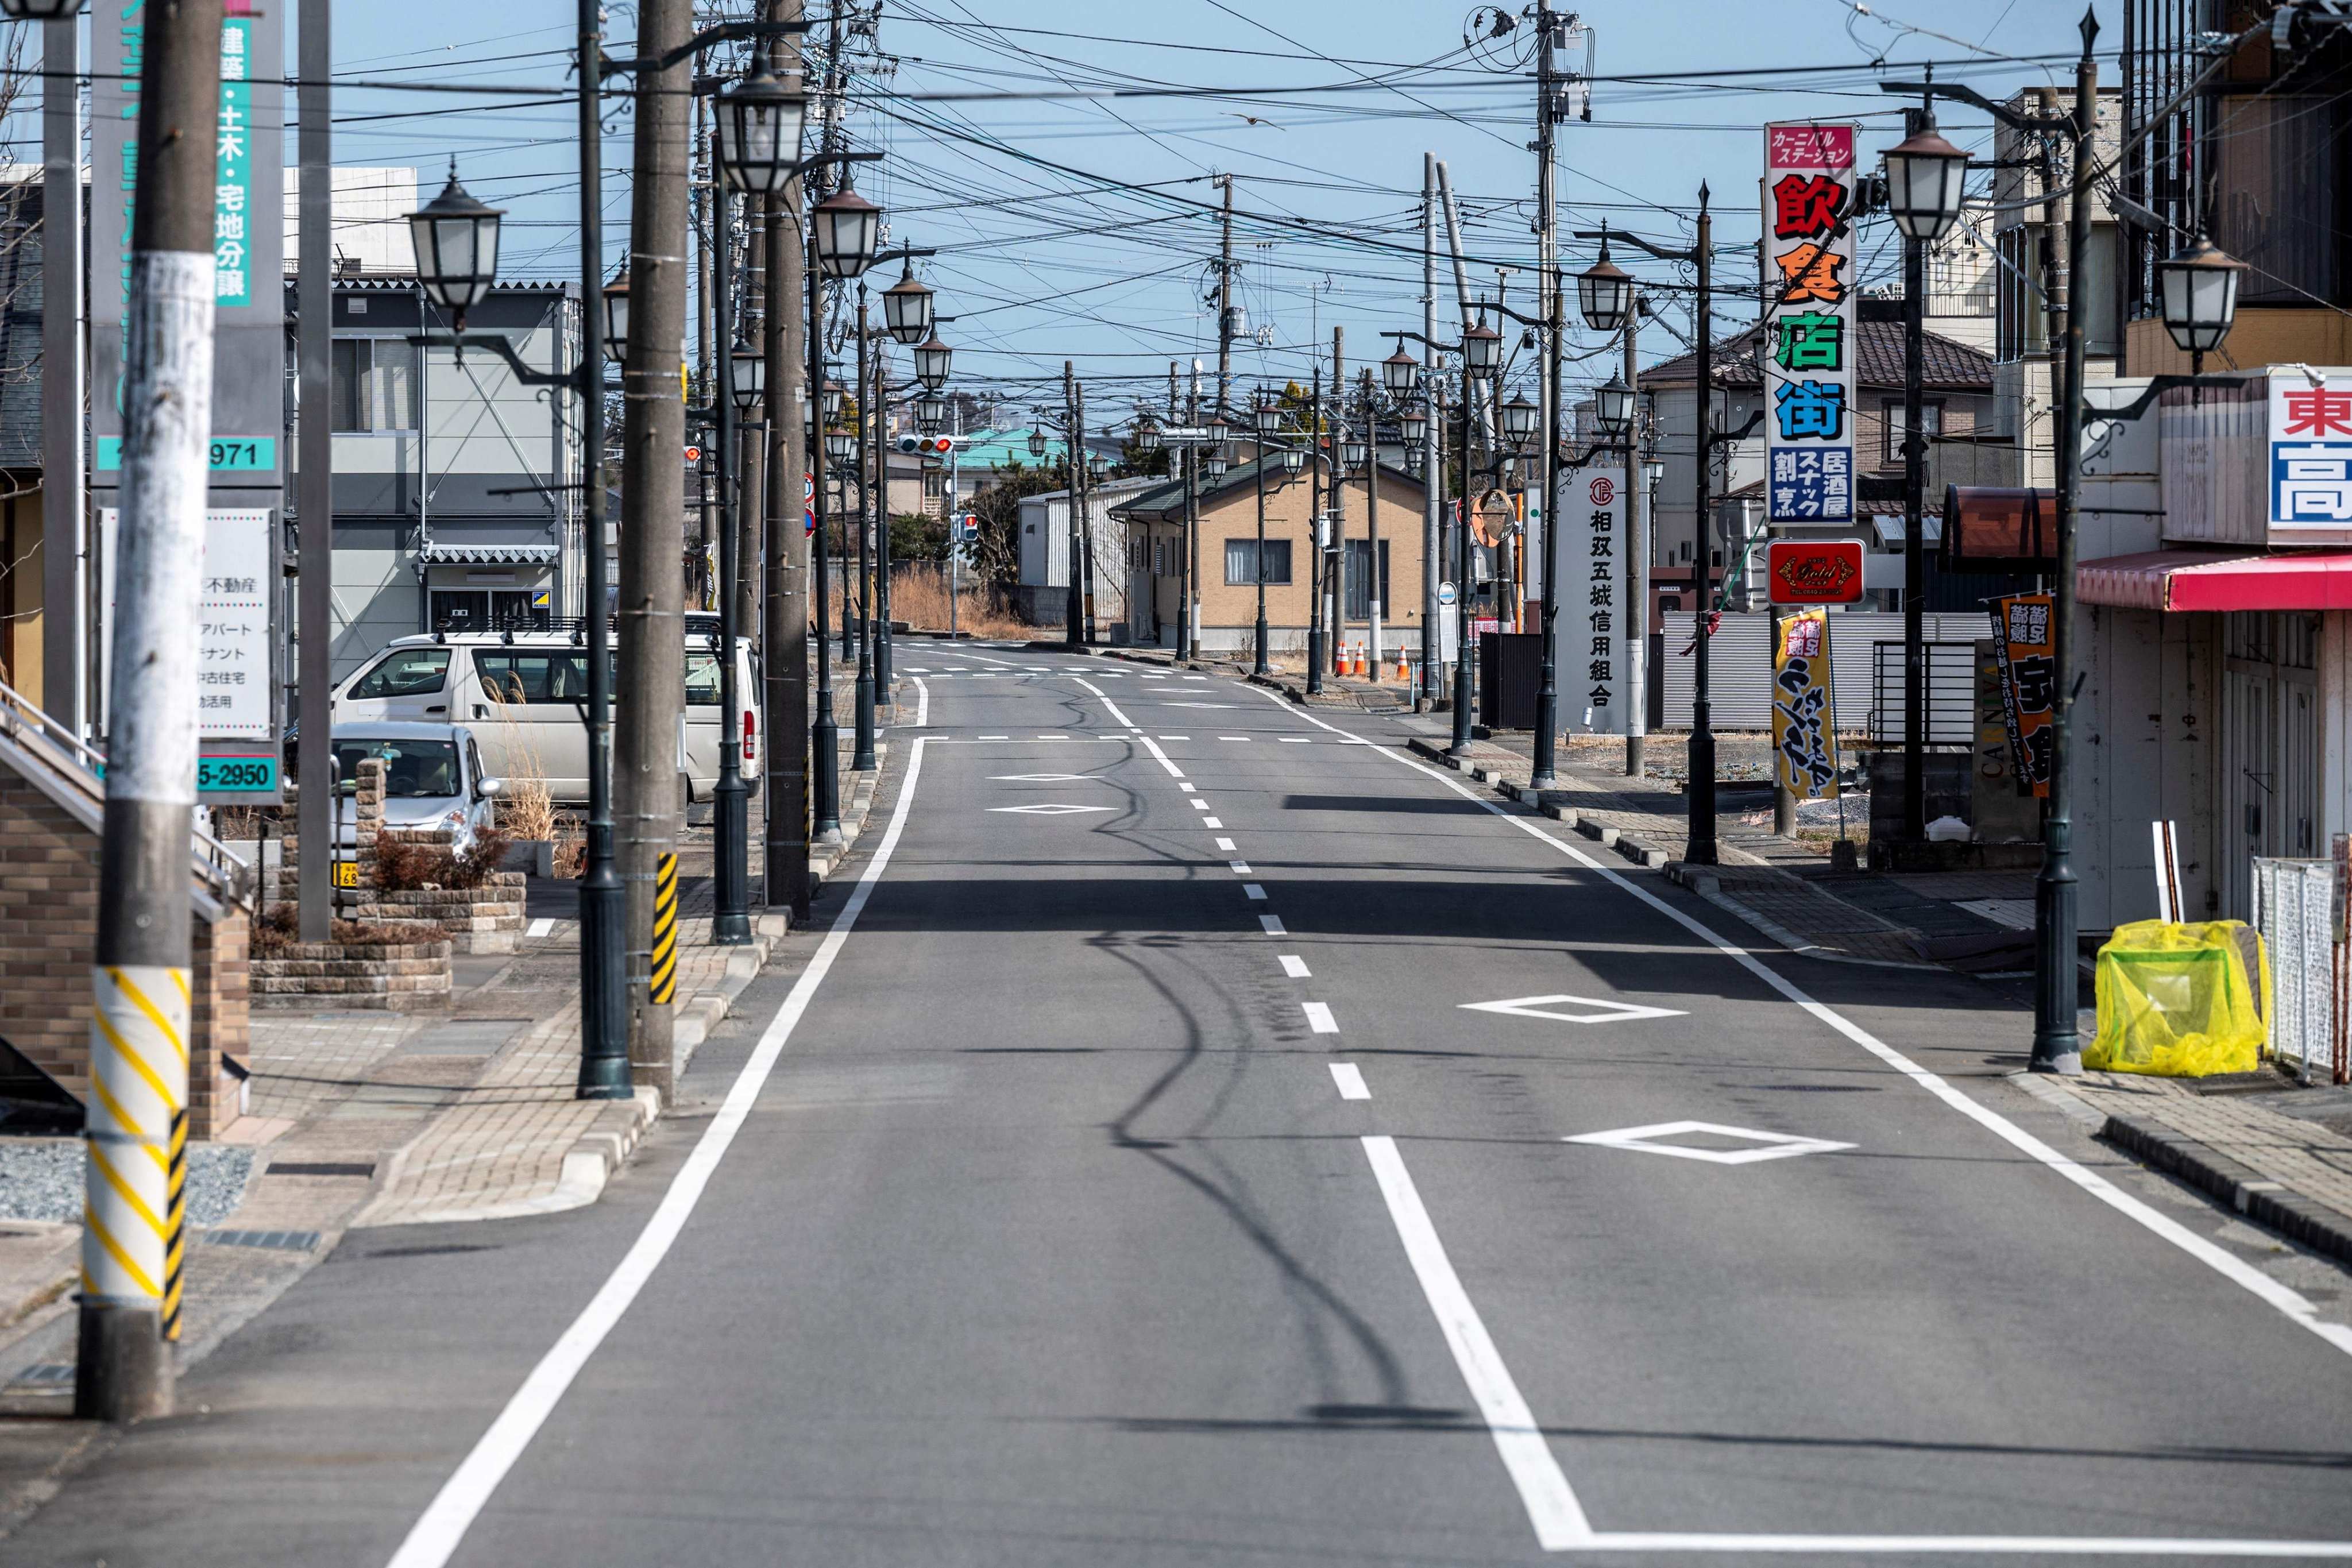 The main street of Namie, Fukushima Prefecture, a town which was part of an exclusion zone around the Fukushima Daiichi nuclear plant following the nuclear disaster in 2011 but has since partially reopened. Photo: AFP